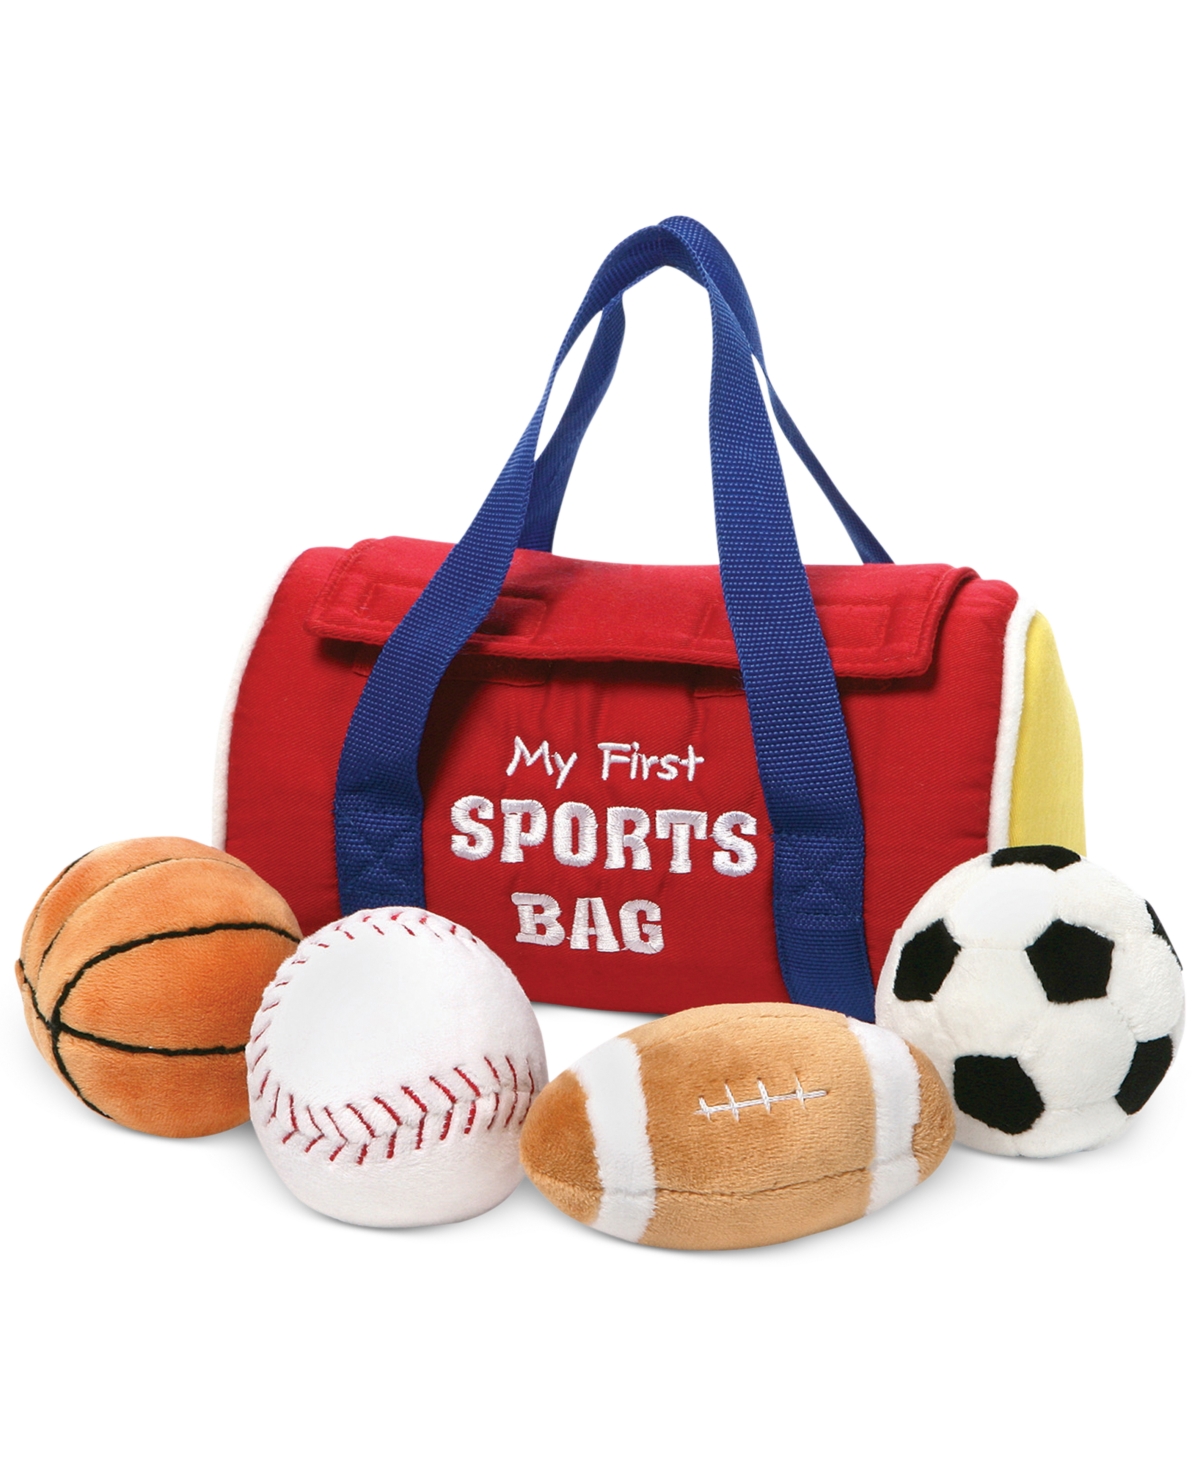 UPC 028399071548 product image for Gund Baby My First Sports Bag Playset Toy | upcitemdb.com